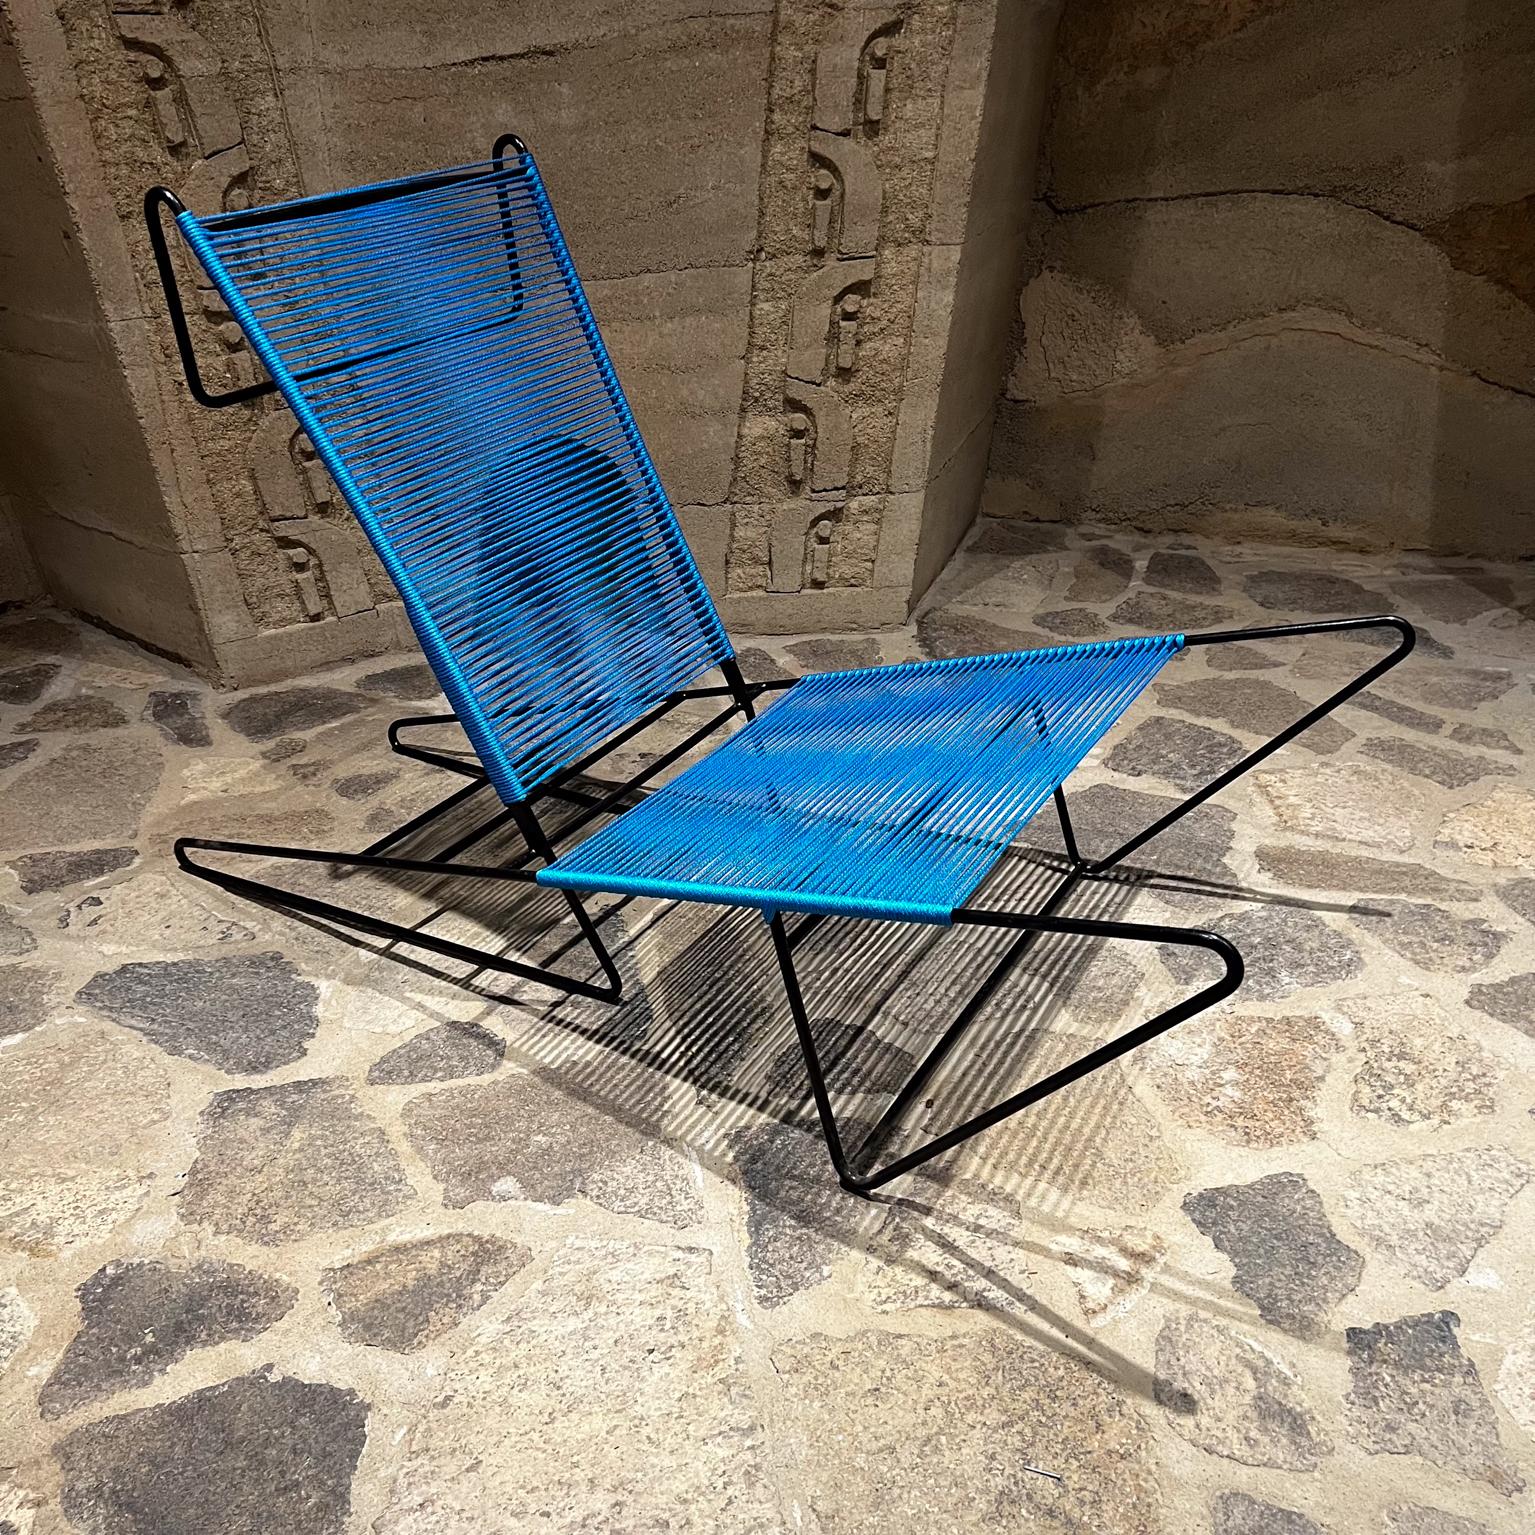 1955 Arturo Pani Custom Modern Blue Lounge Chairs Mexico City In Good Condition For Sale In Chula Vista, CA